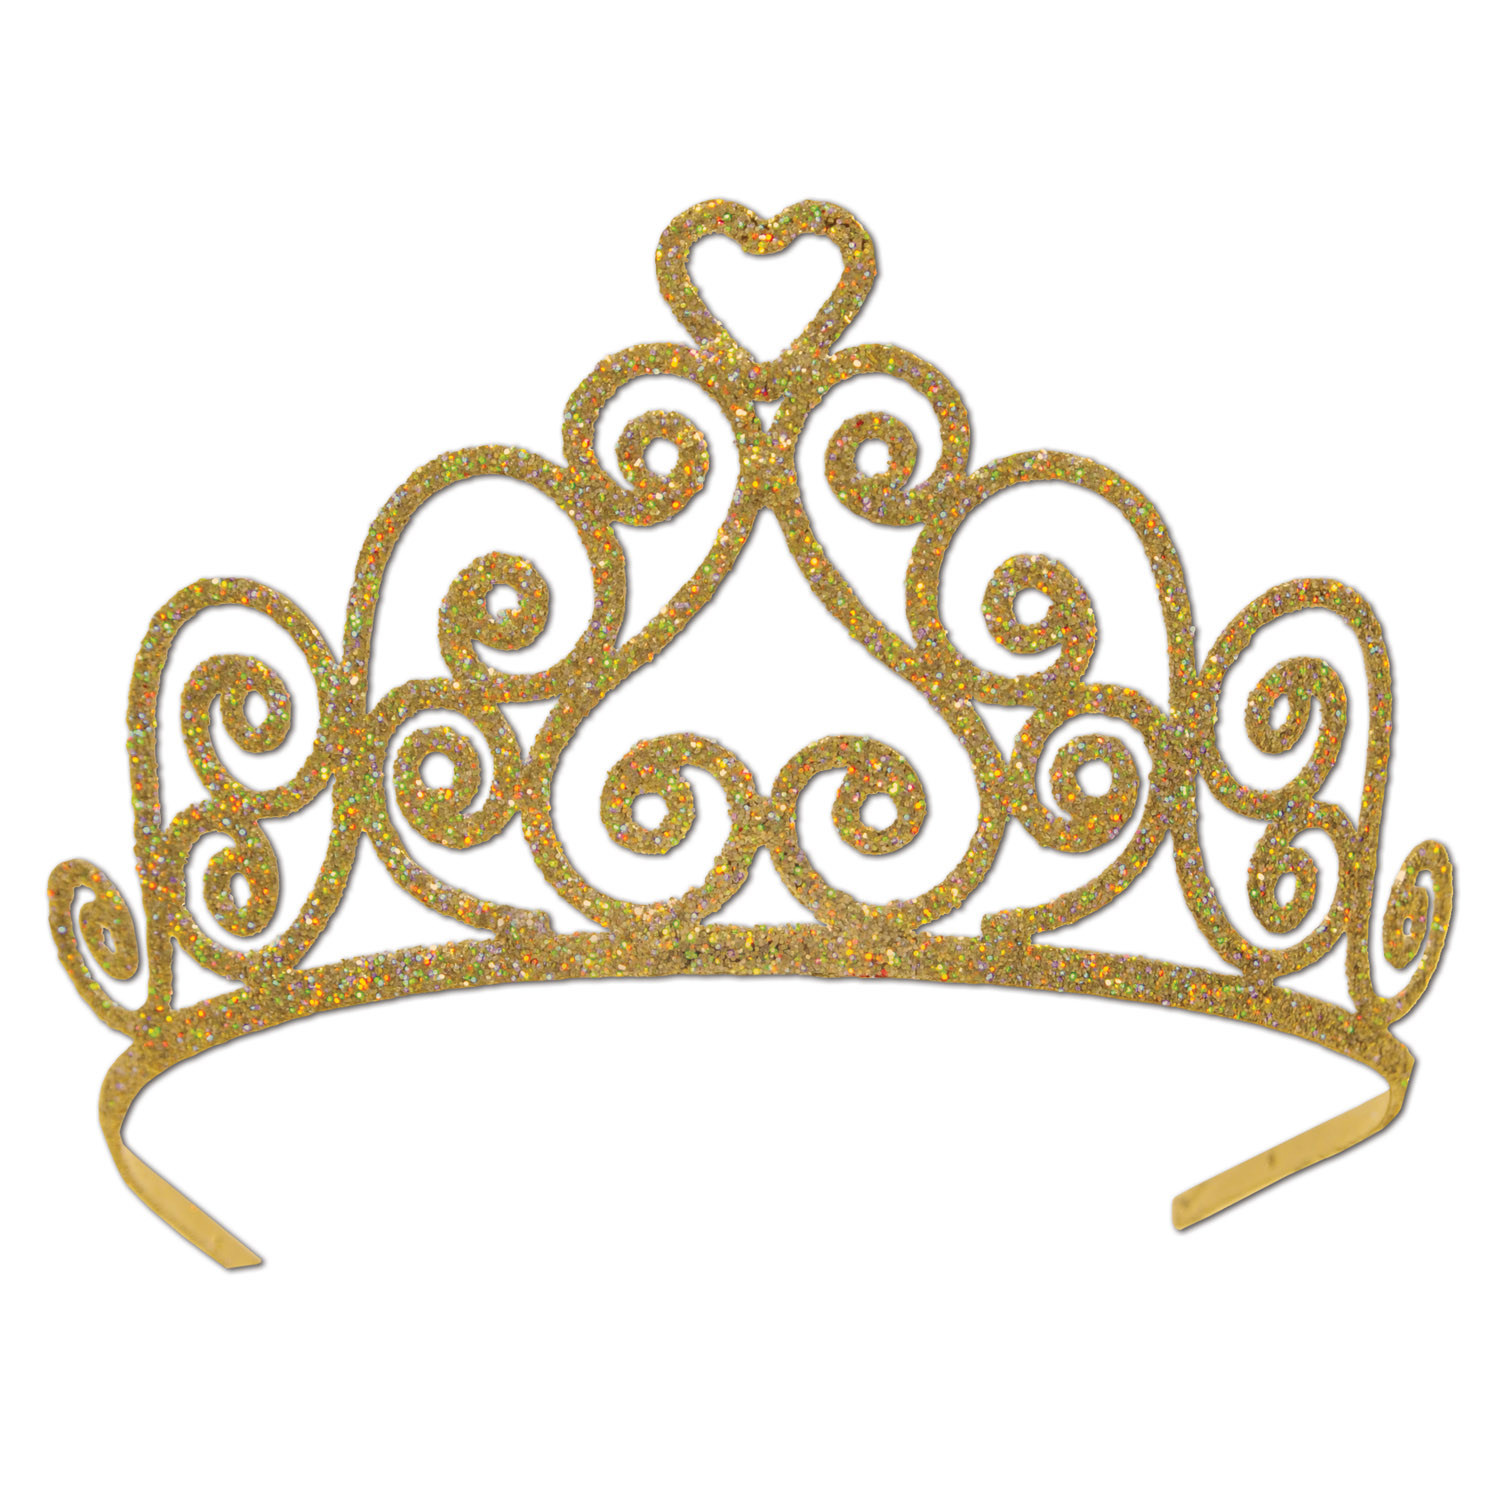 Gold plastic tiara with glitter and a swirly design.